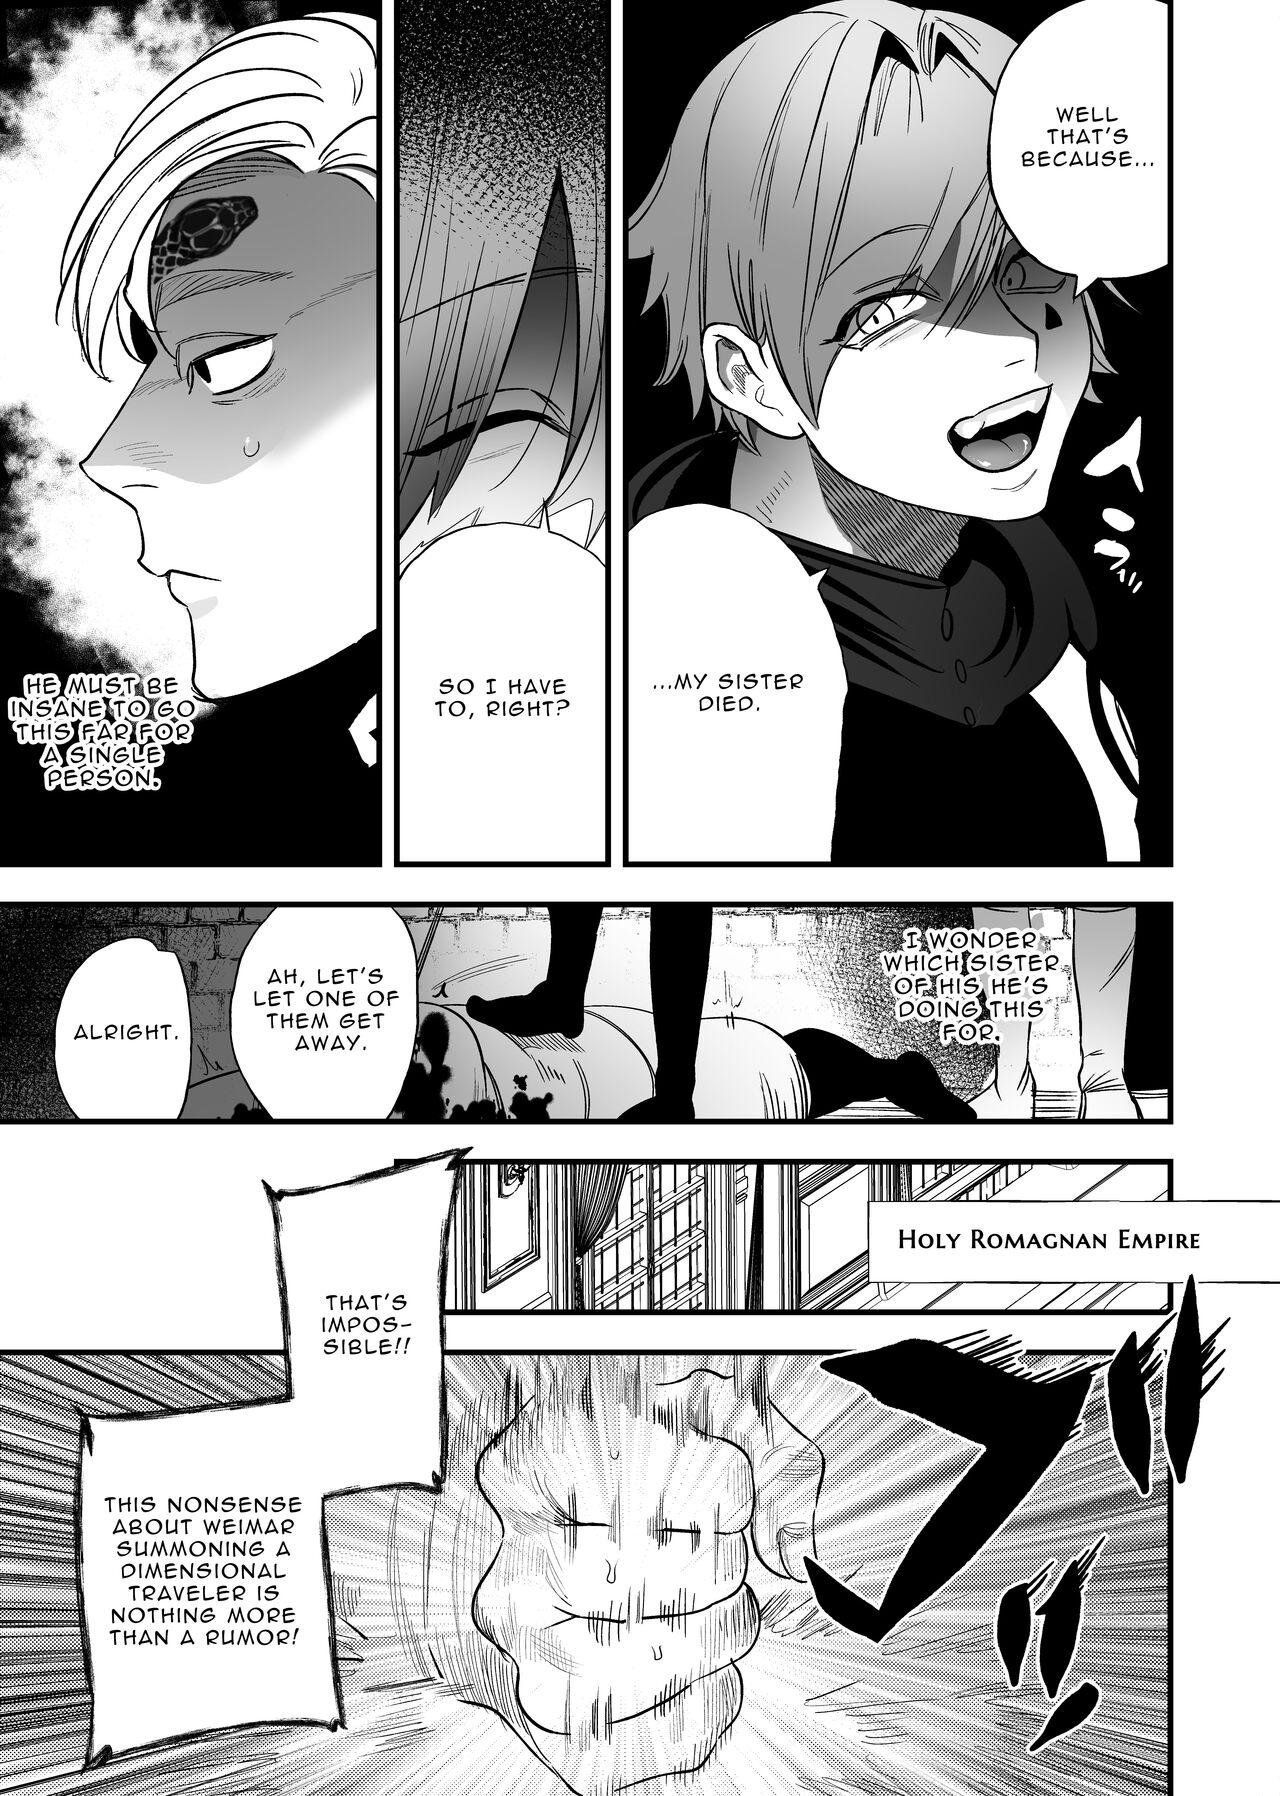 Lesbiansex The Man Who Saved Me on my Isekai Trip was a Killer... 2 - Original This - Page 5